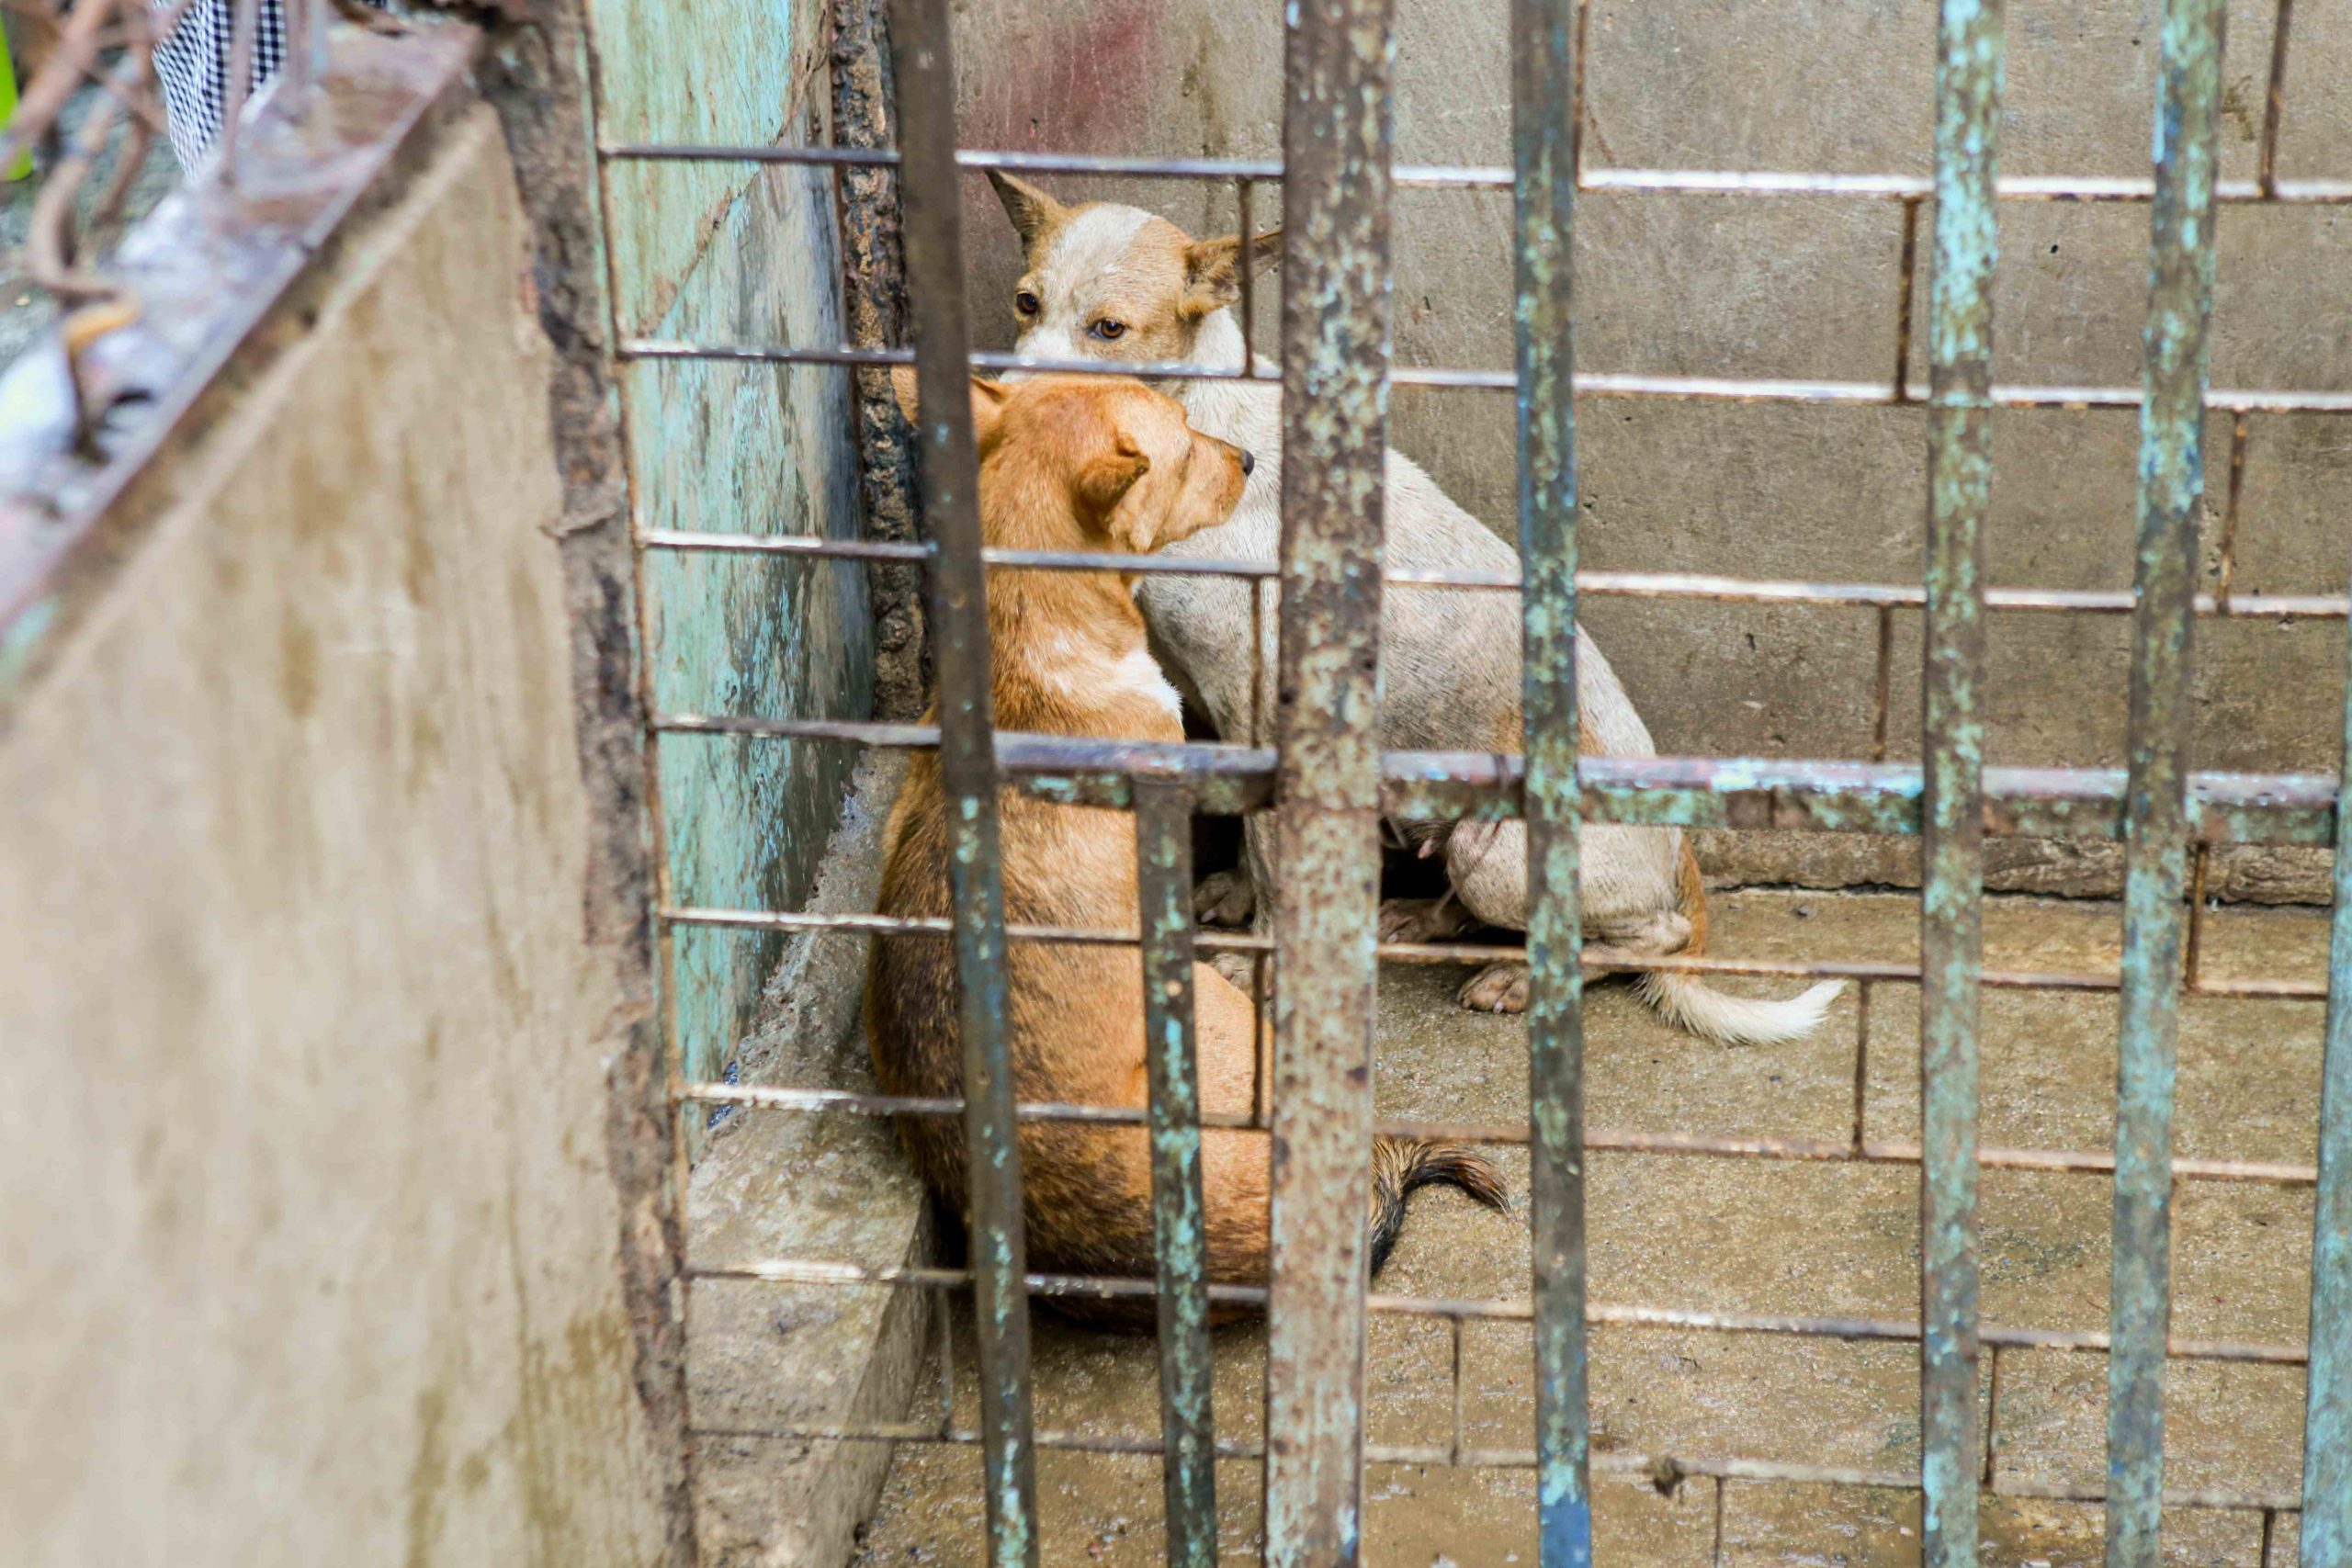 Dog Meat Will Be Off the Menu in South Korea